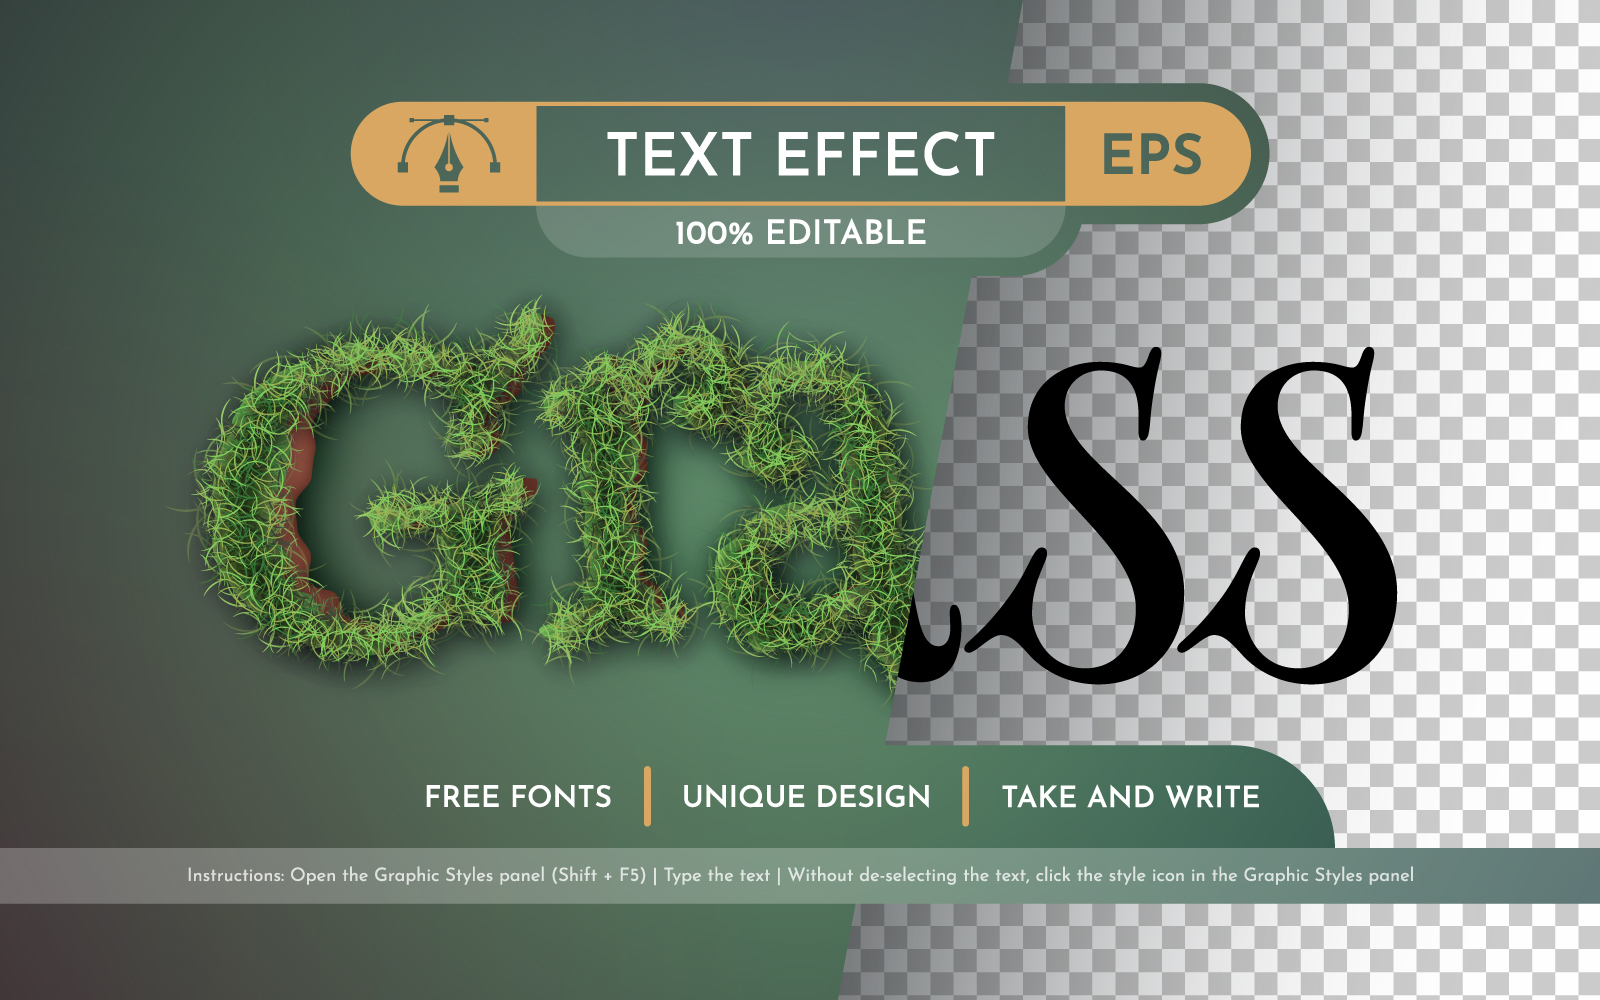 Realistic Grass - Editable Text Effect, Font Style